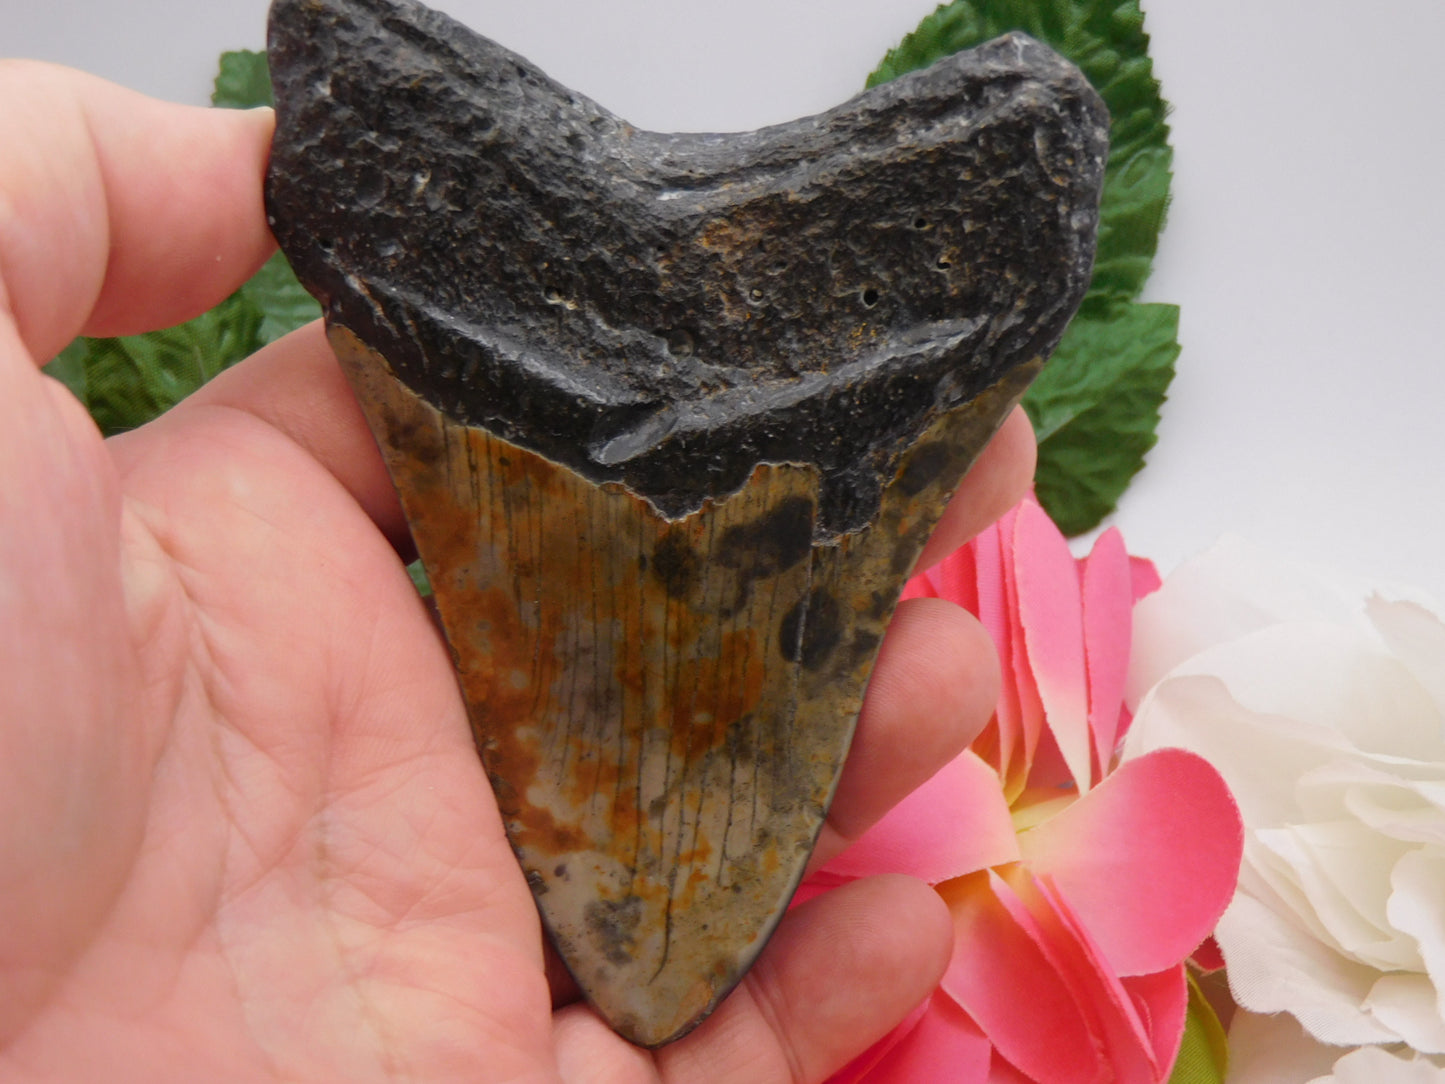 4.3" Polished Megalodon Shark Tooth with Turquoise Inlay